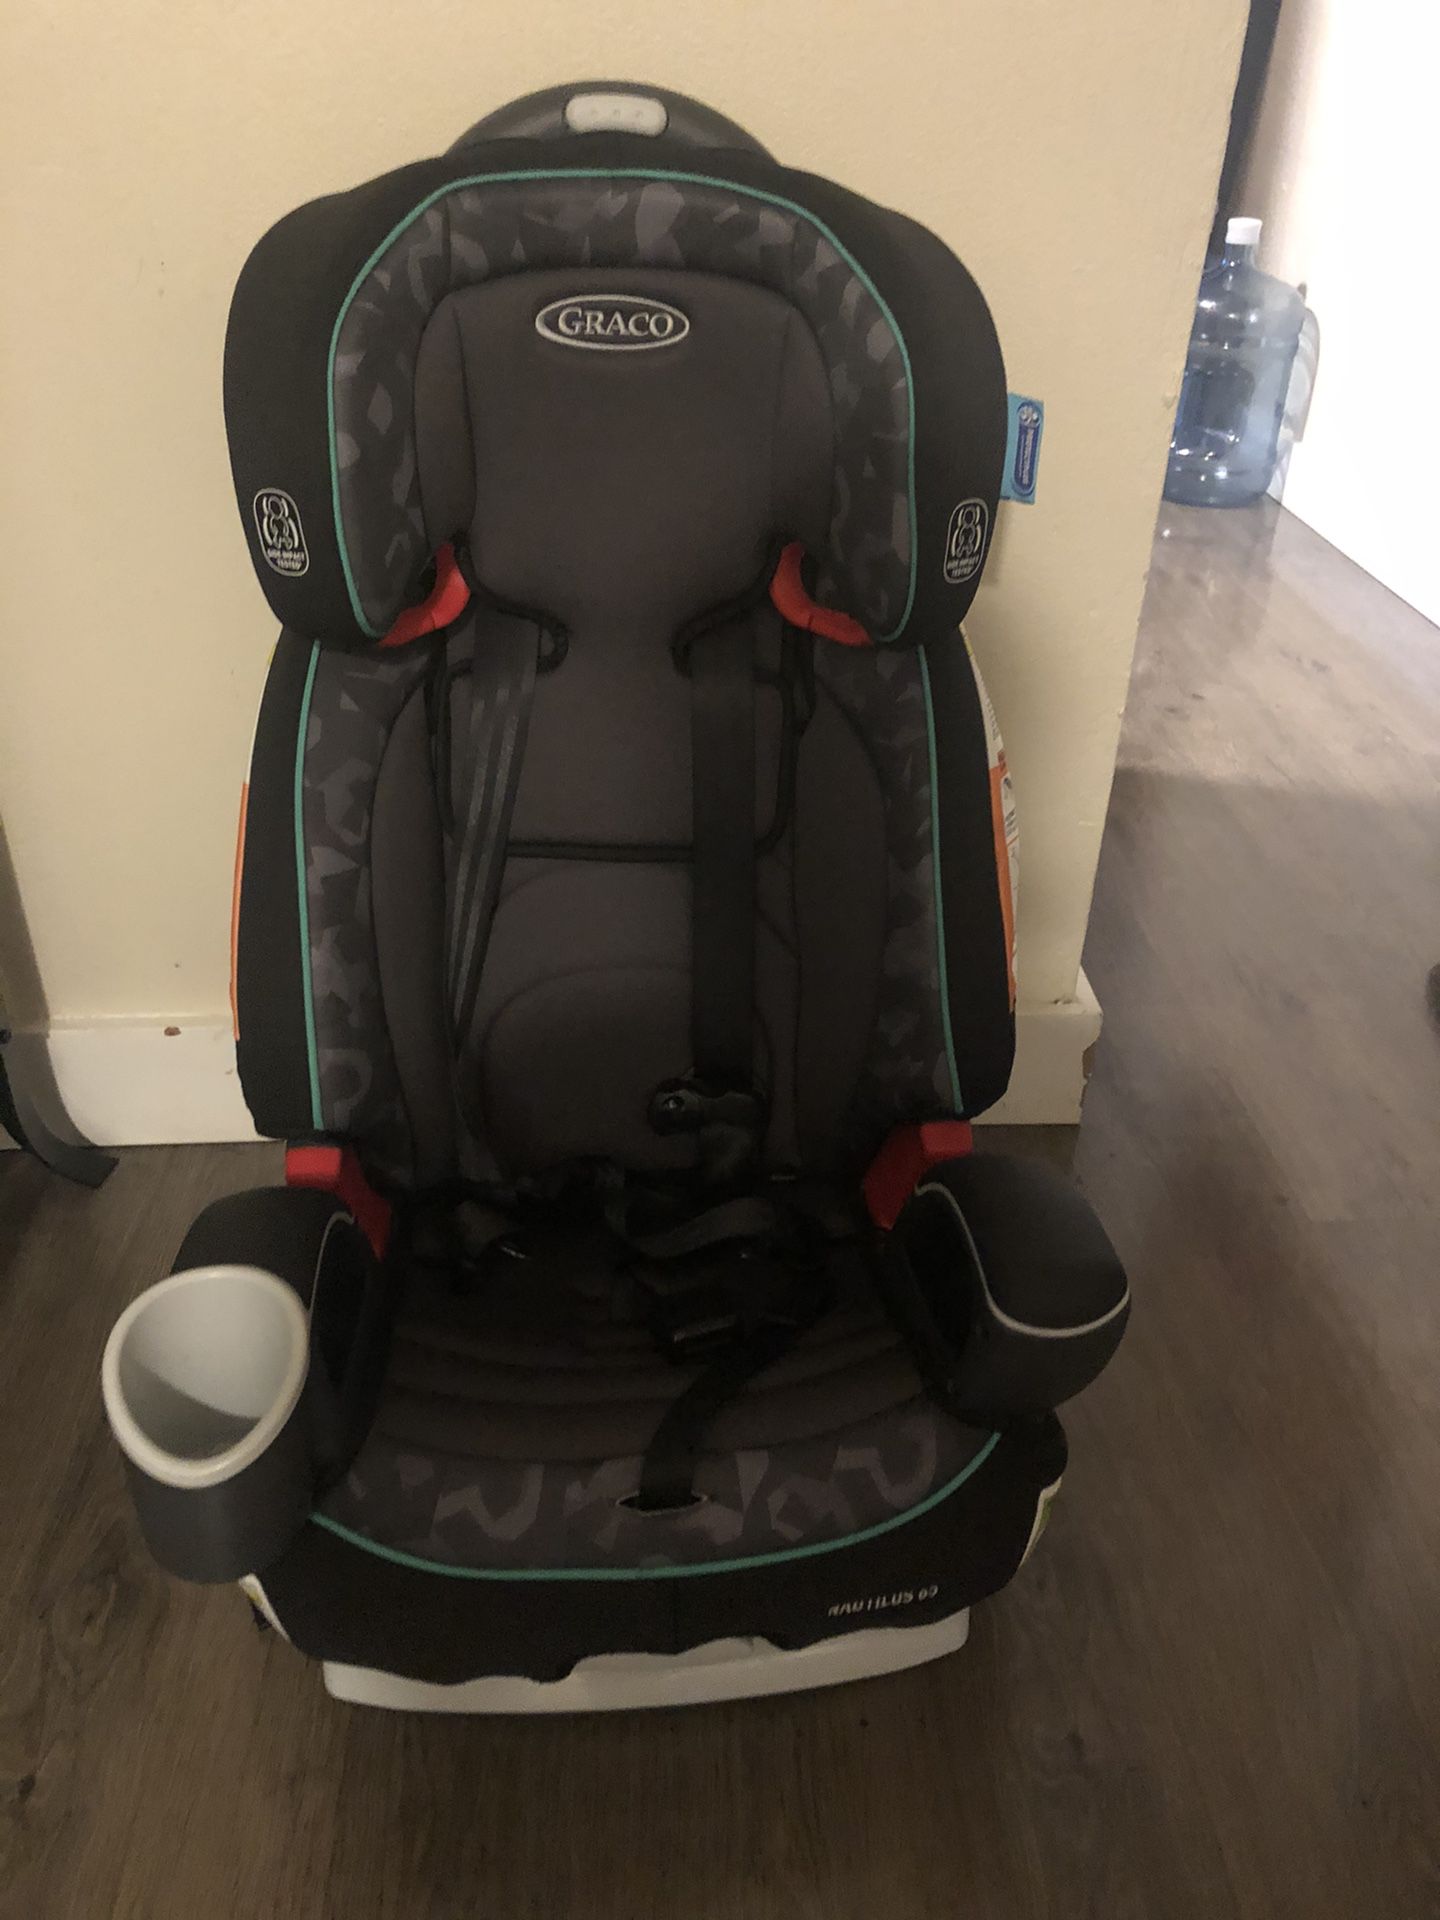 GRACO CAR SEAT/BOOSTER SEAT